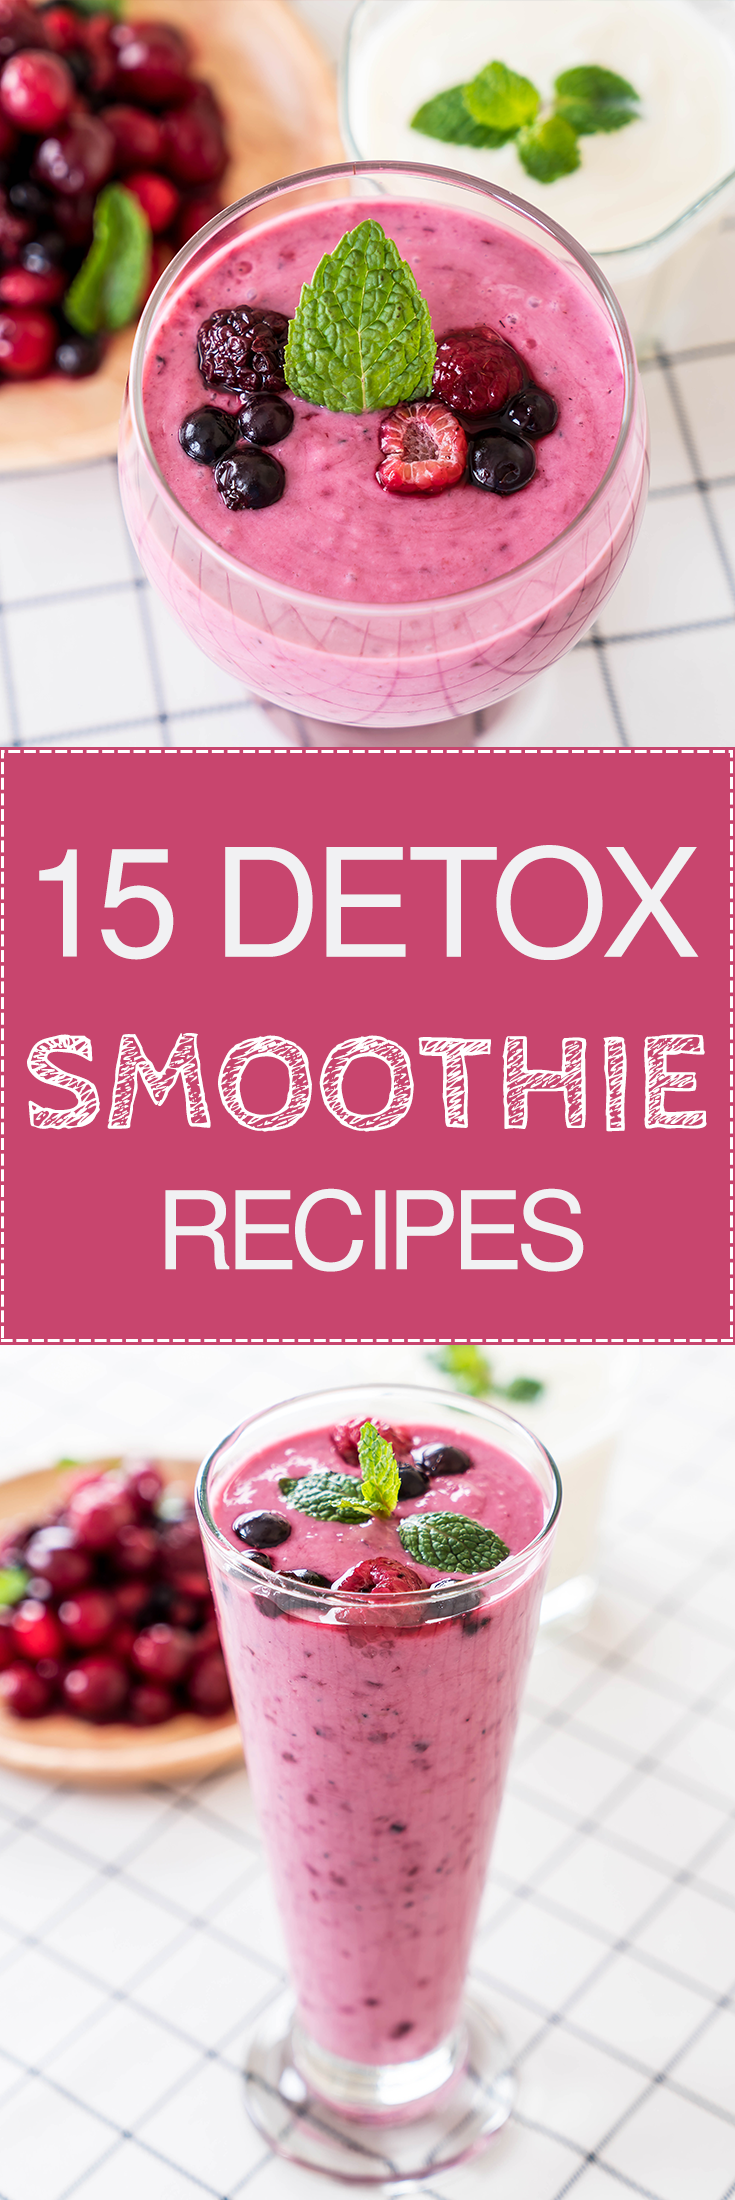 15 Detox Smoothies to Shed Belly Weight Fast